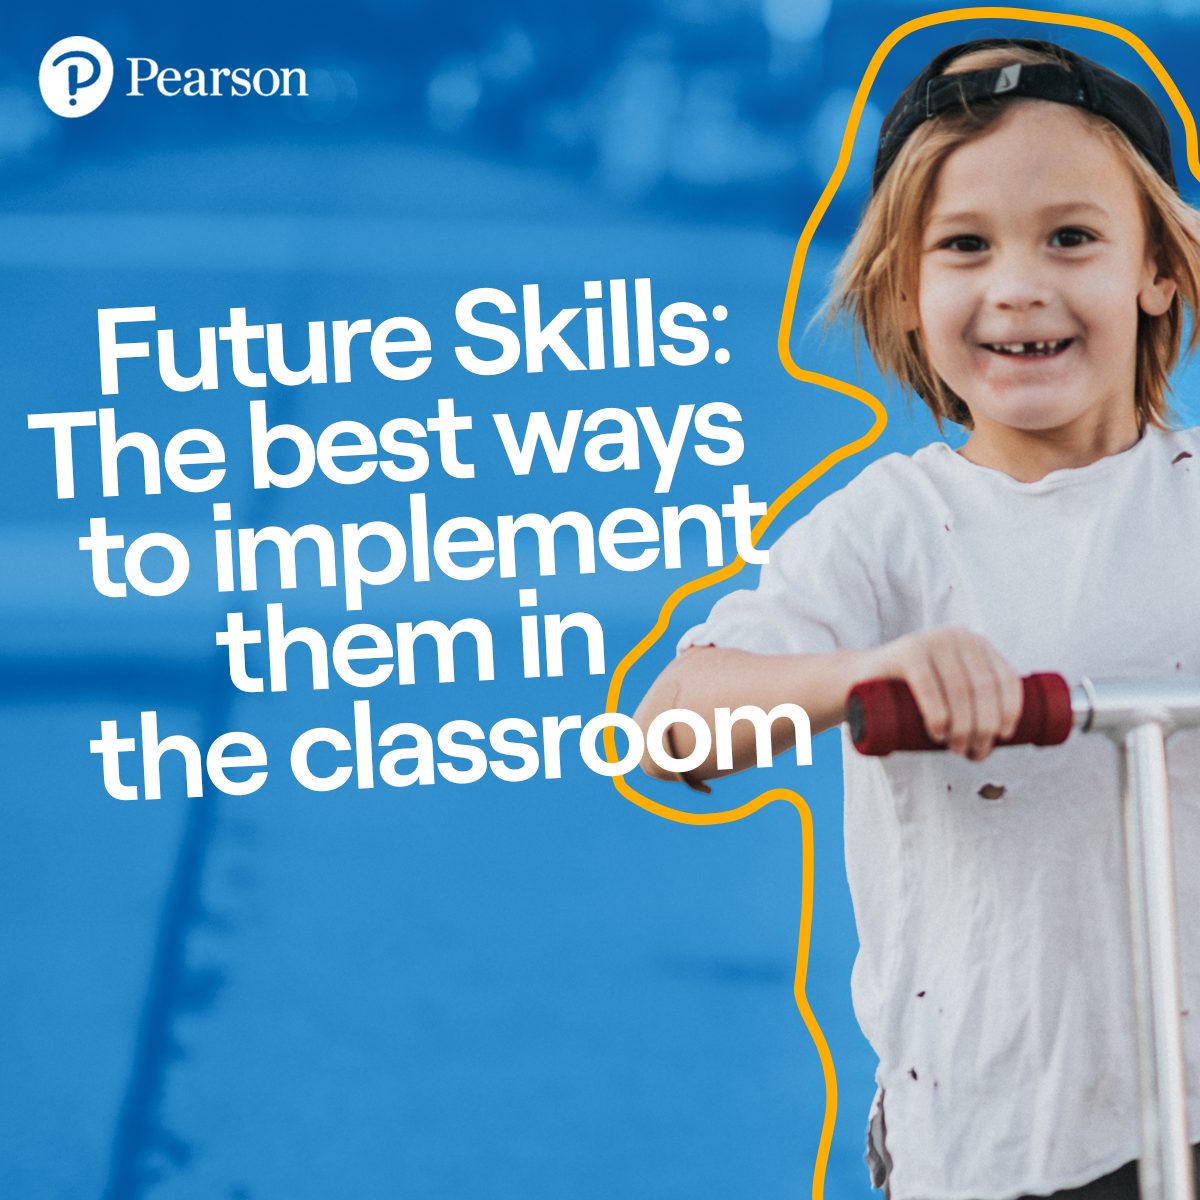 Future skills: The best ways to implement them in the classroom  